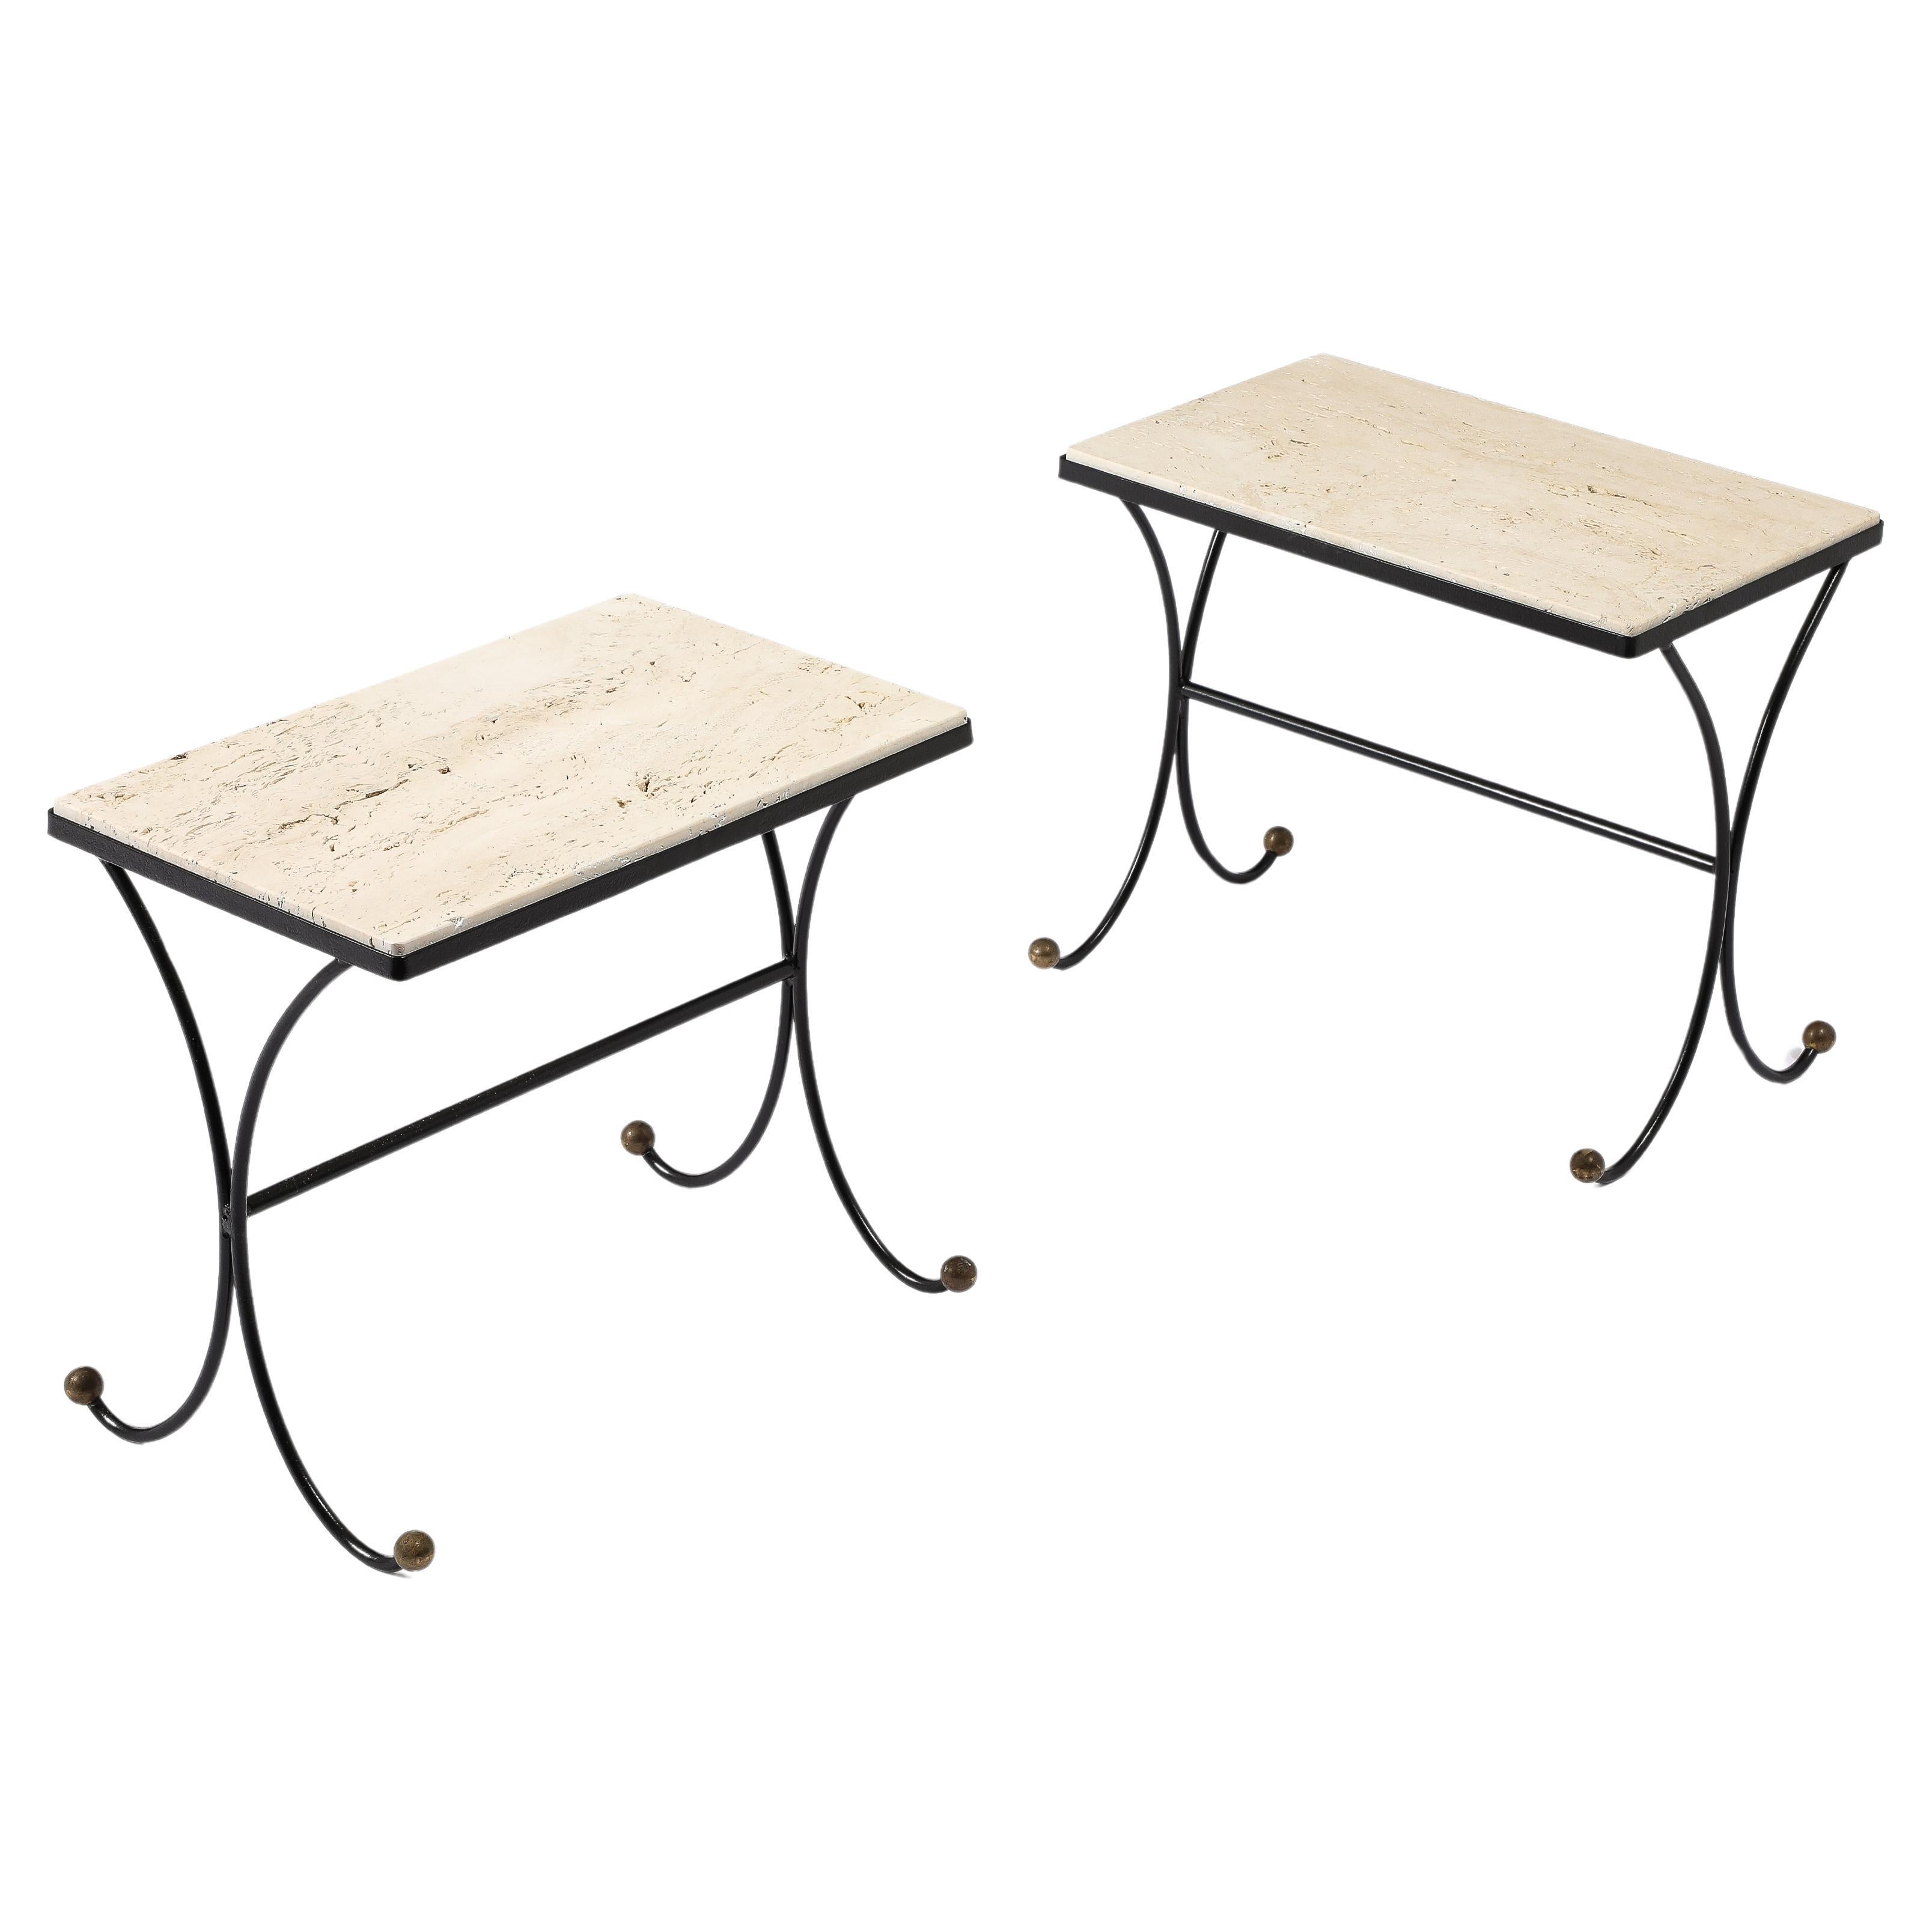 Jansen Travertine & Wrought Iron End Tables, France 1950's For Sale